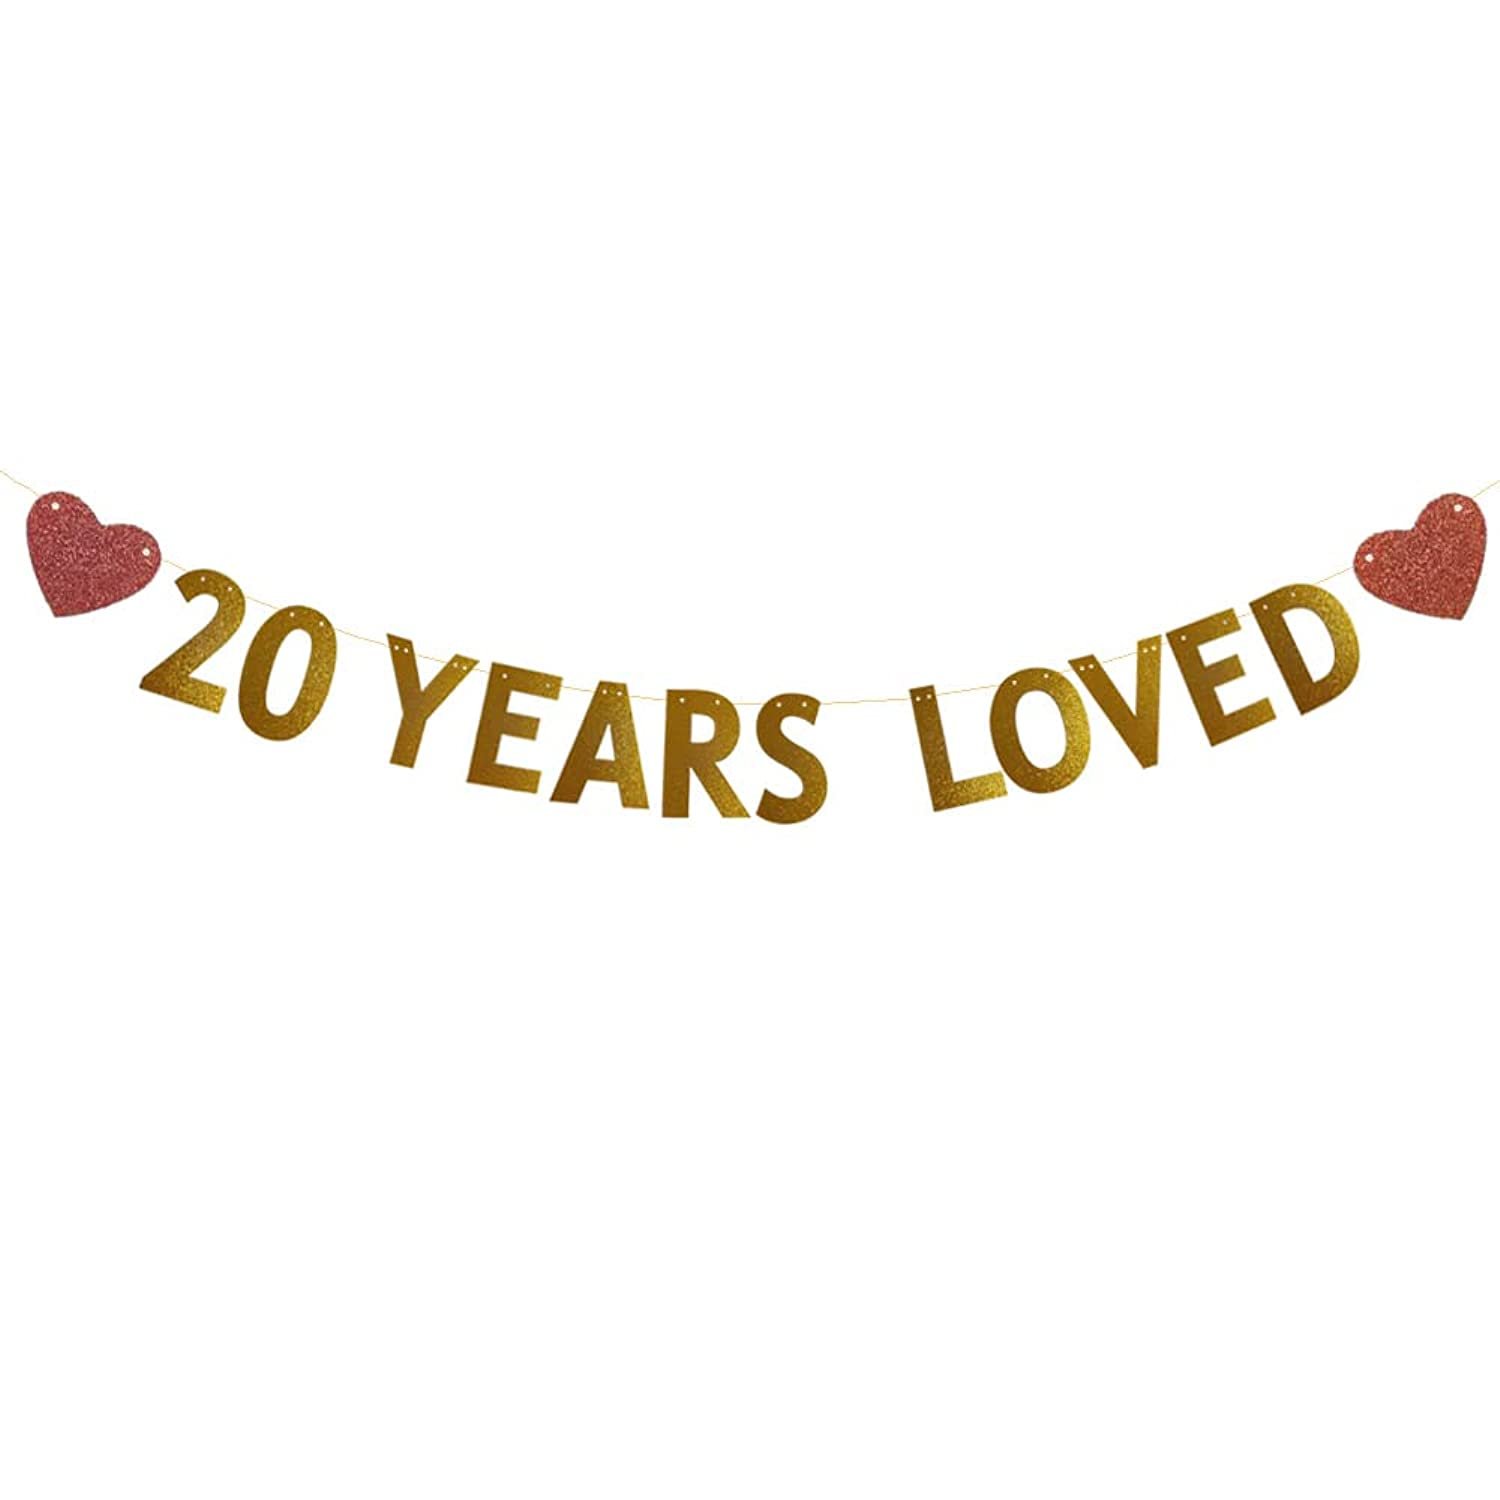 20 Years Loved Banner For 20Th Birthday /Wedding Anniversary Party Decorations Supplies, 